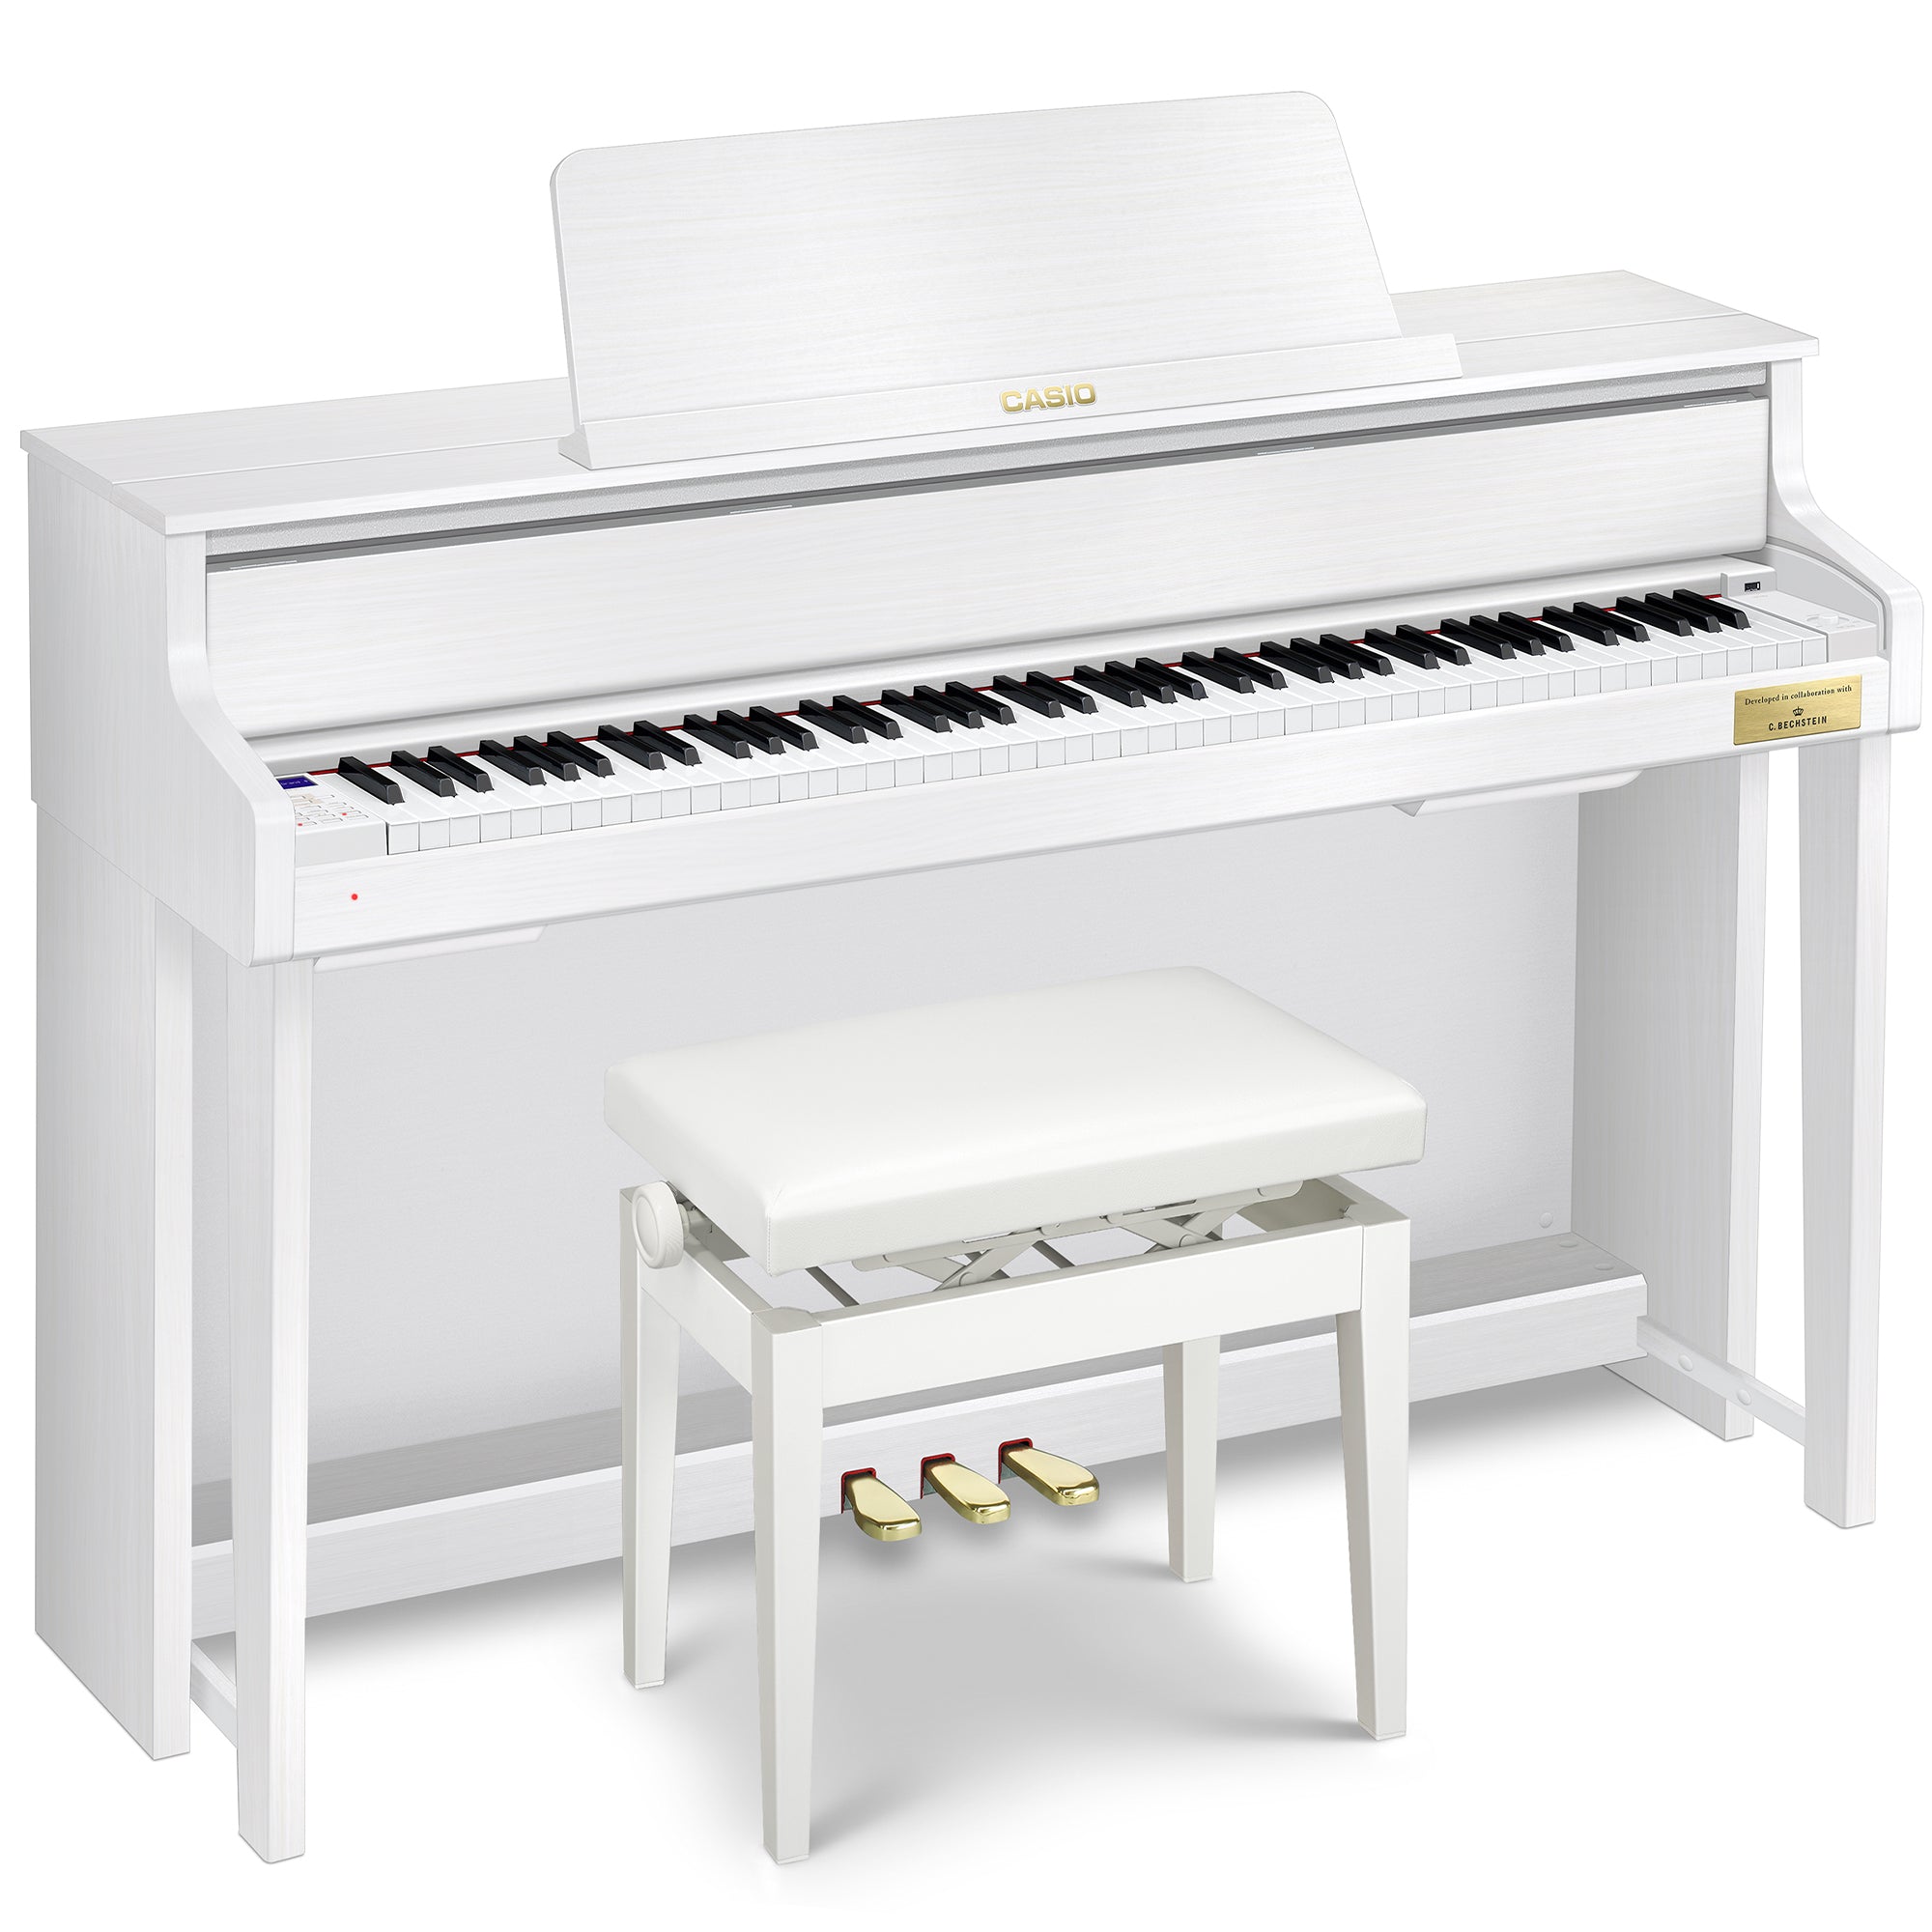 Casio Celviano Grand Hybrid GP-310 Digital Piano - Natural White Wood - Right view with bench